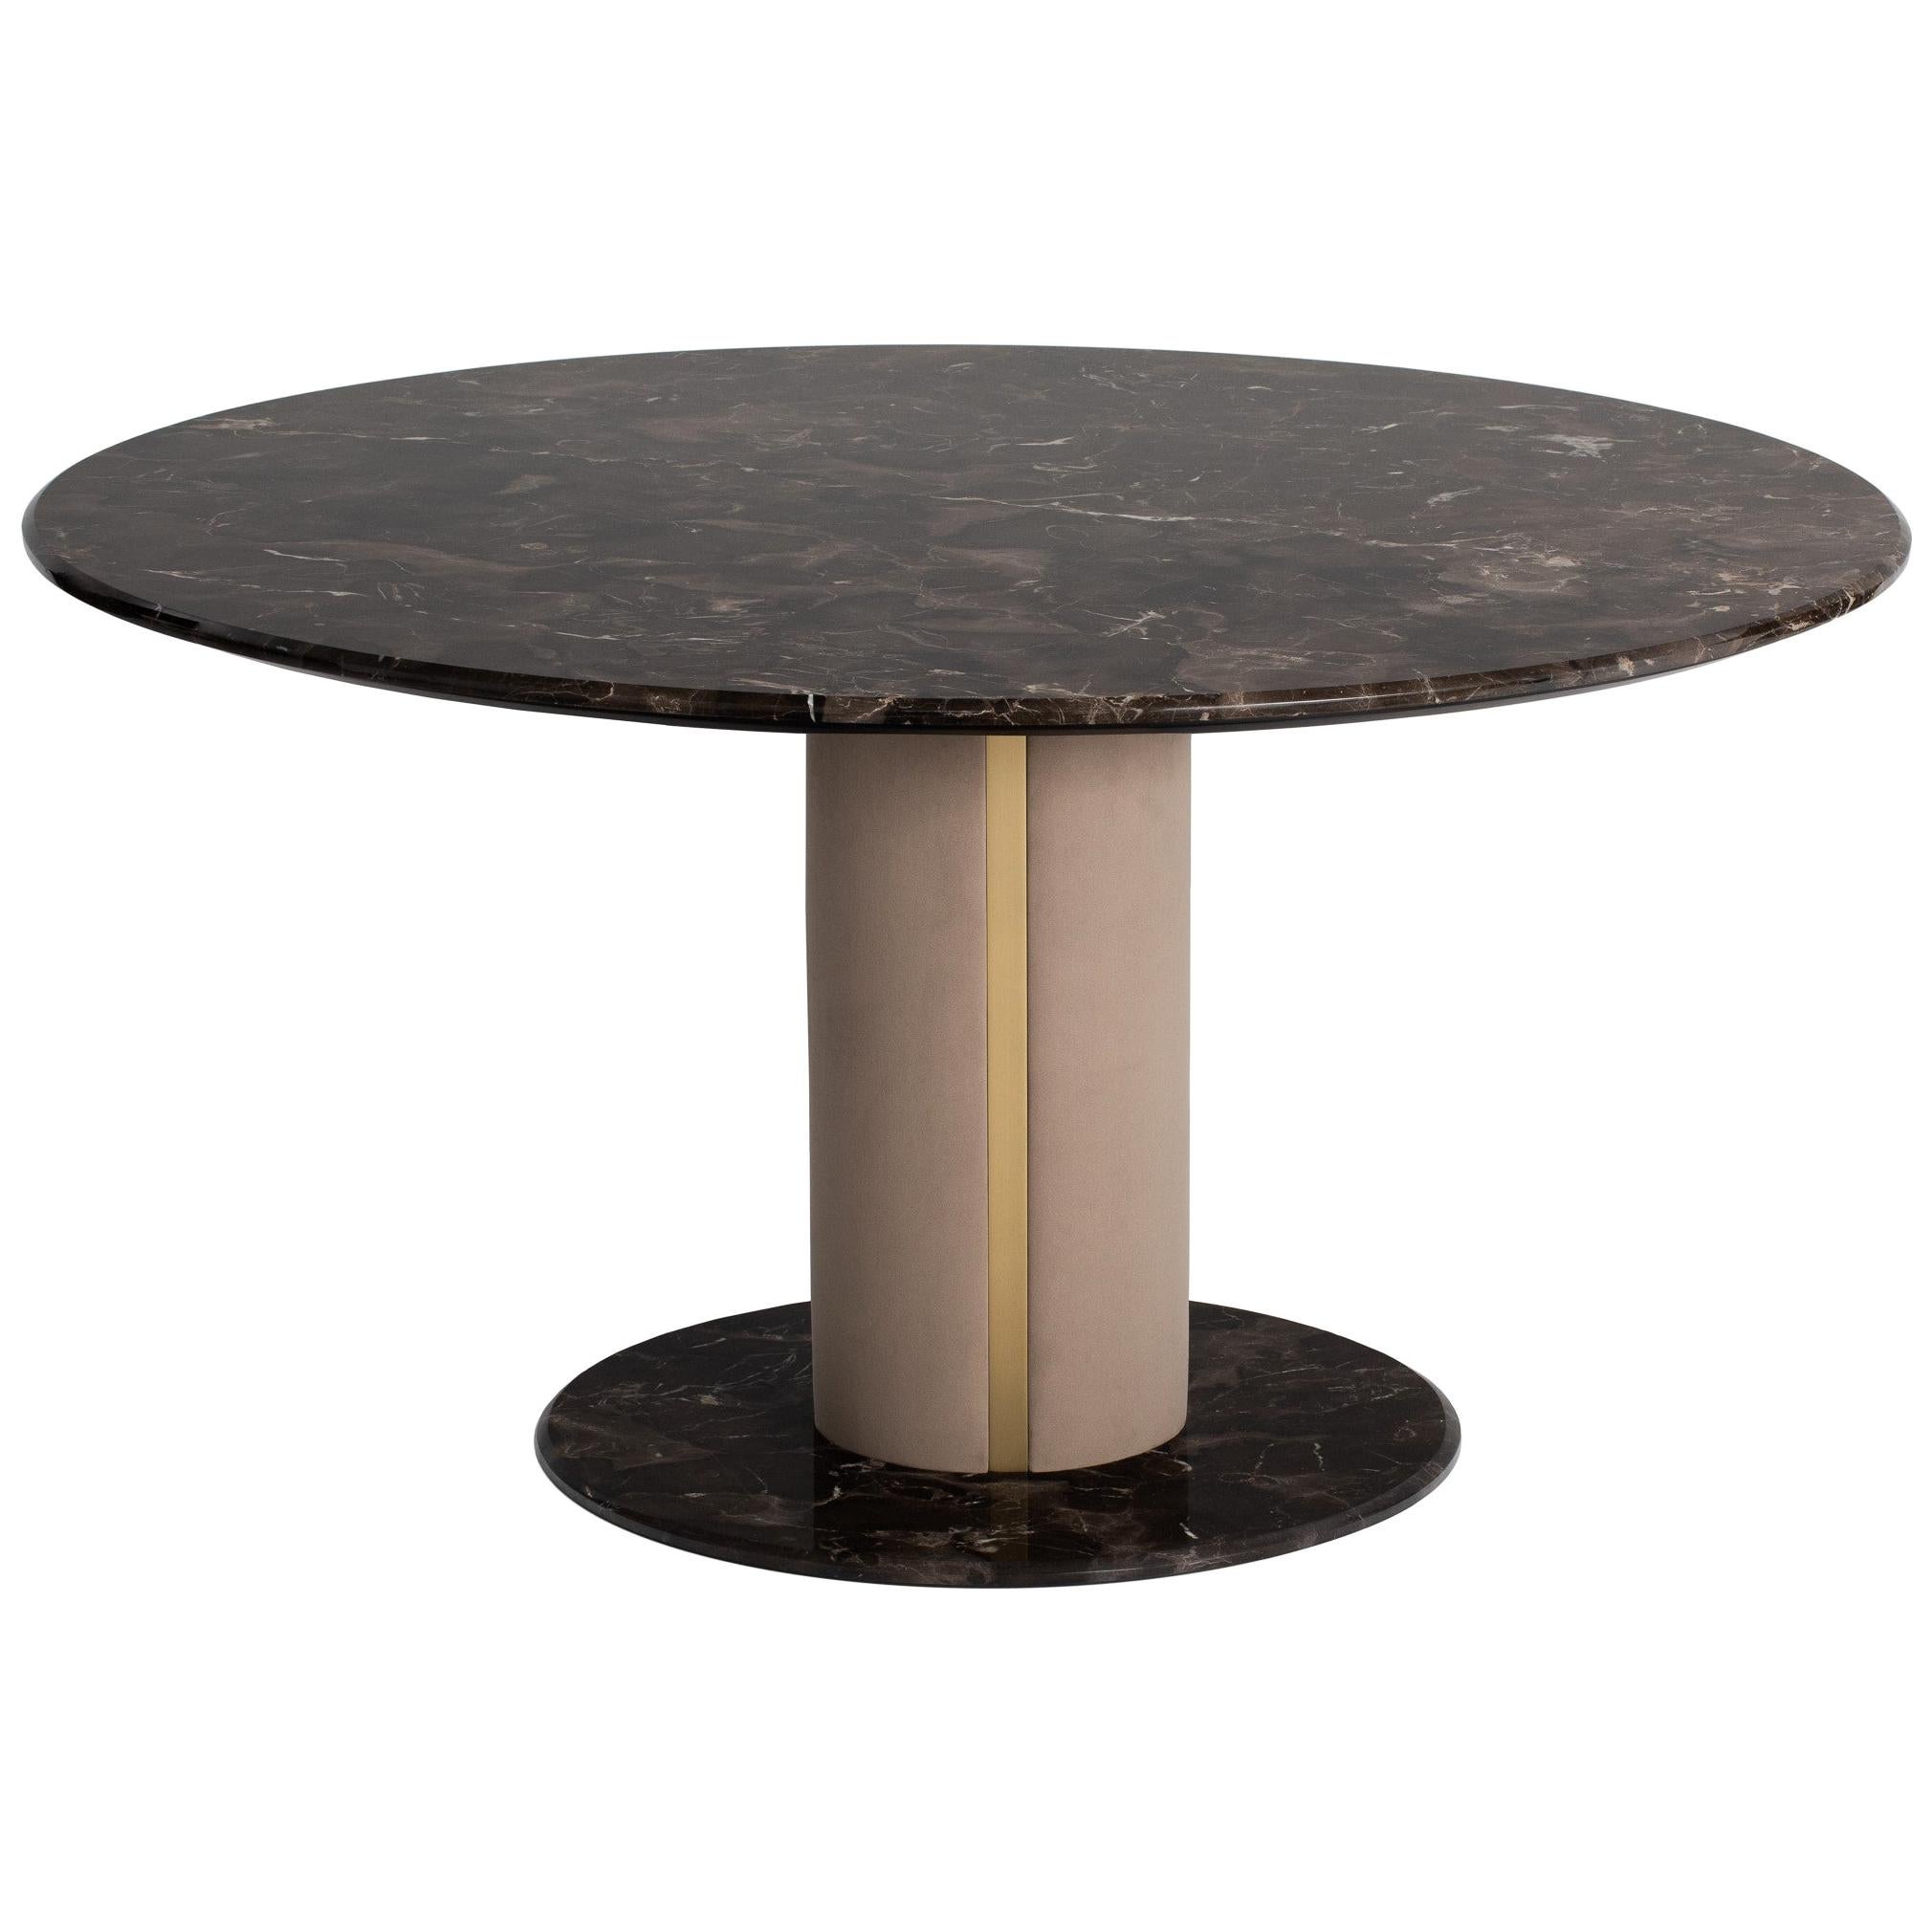 LUNA round table with Marble Top and Base